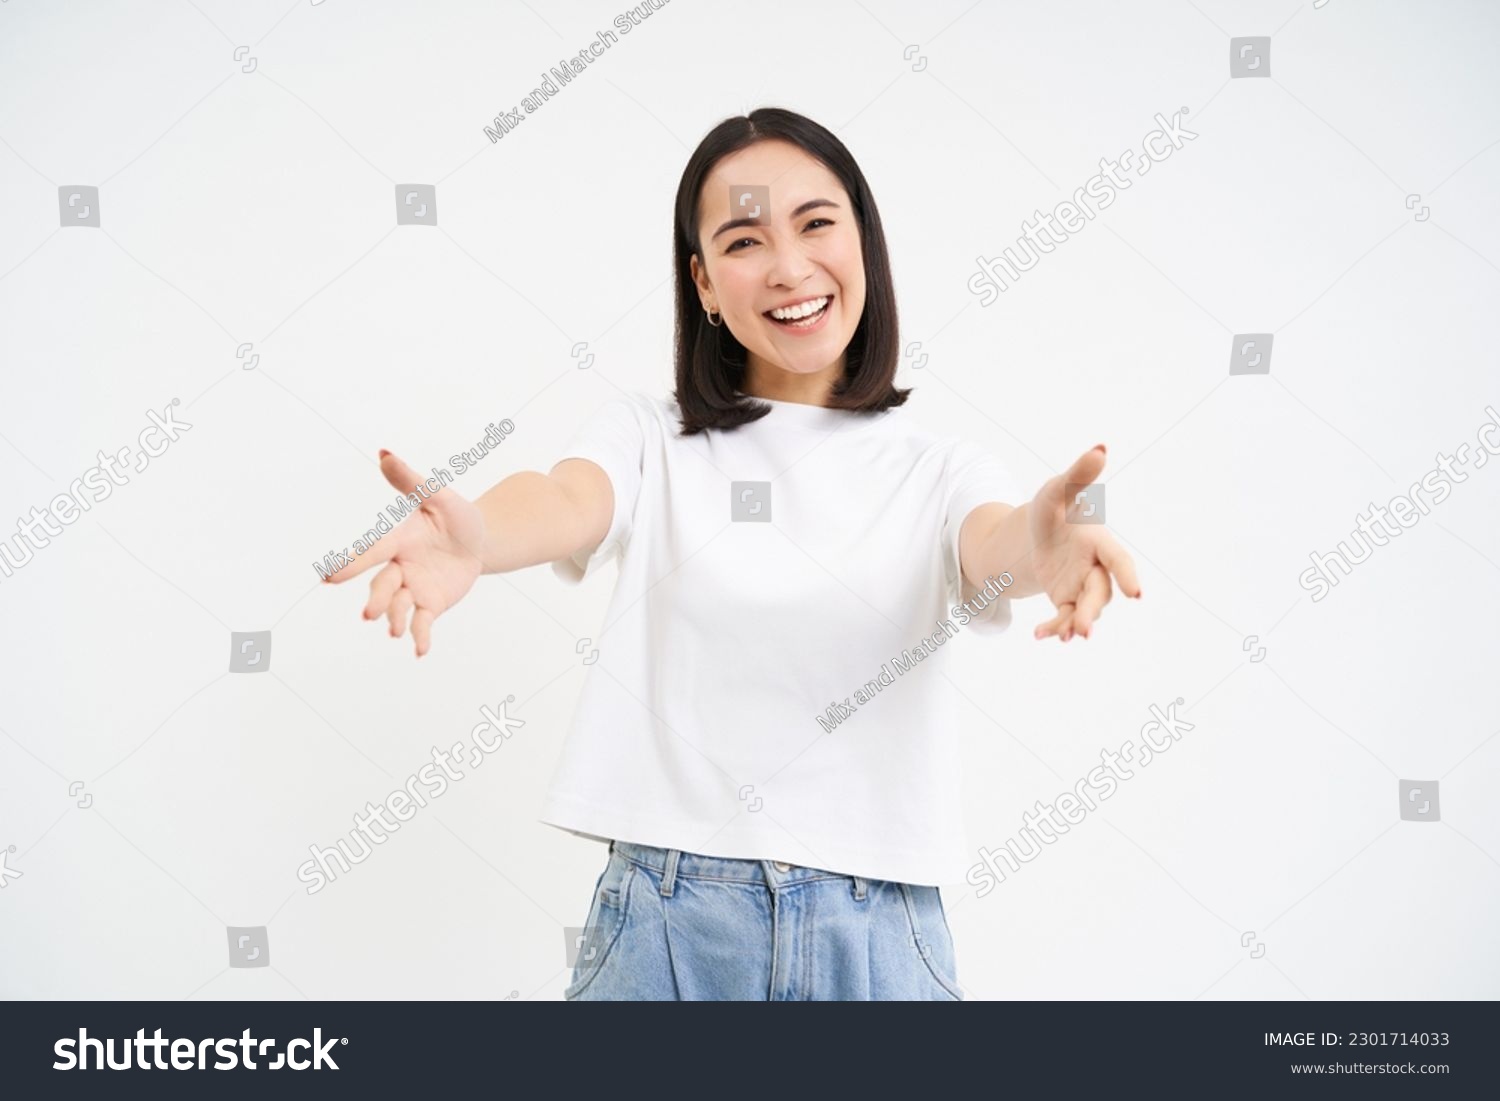 Friendly smiling asian woman, reaching her hands towards camera, hugging, welcoming you, standing over white background. #2301714033